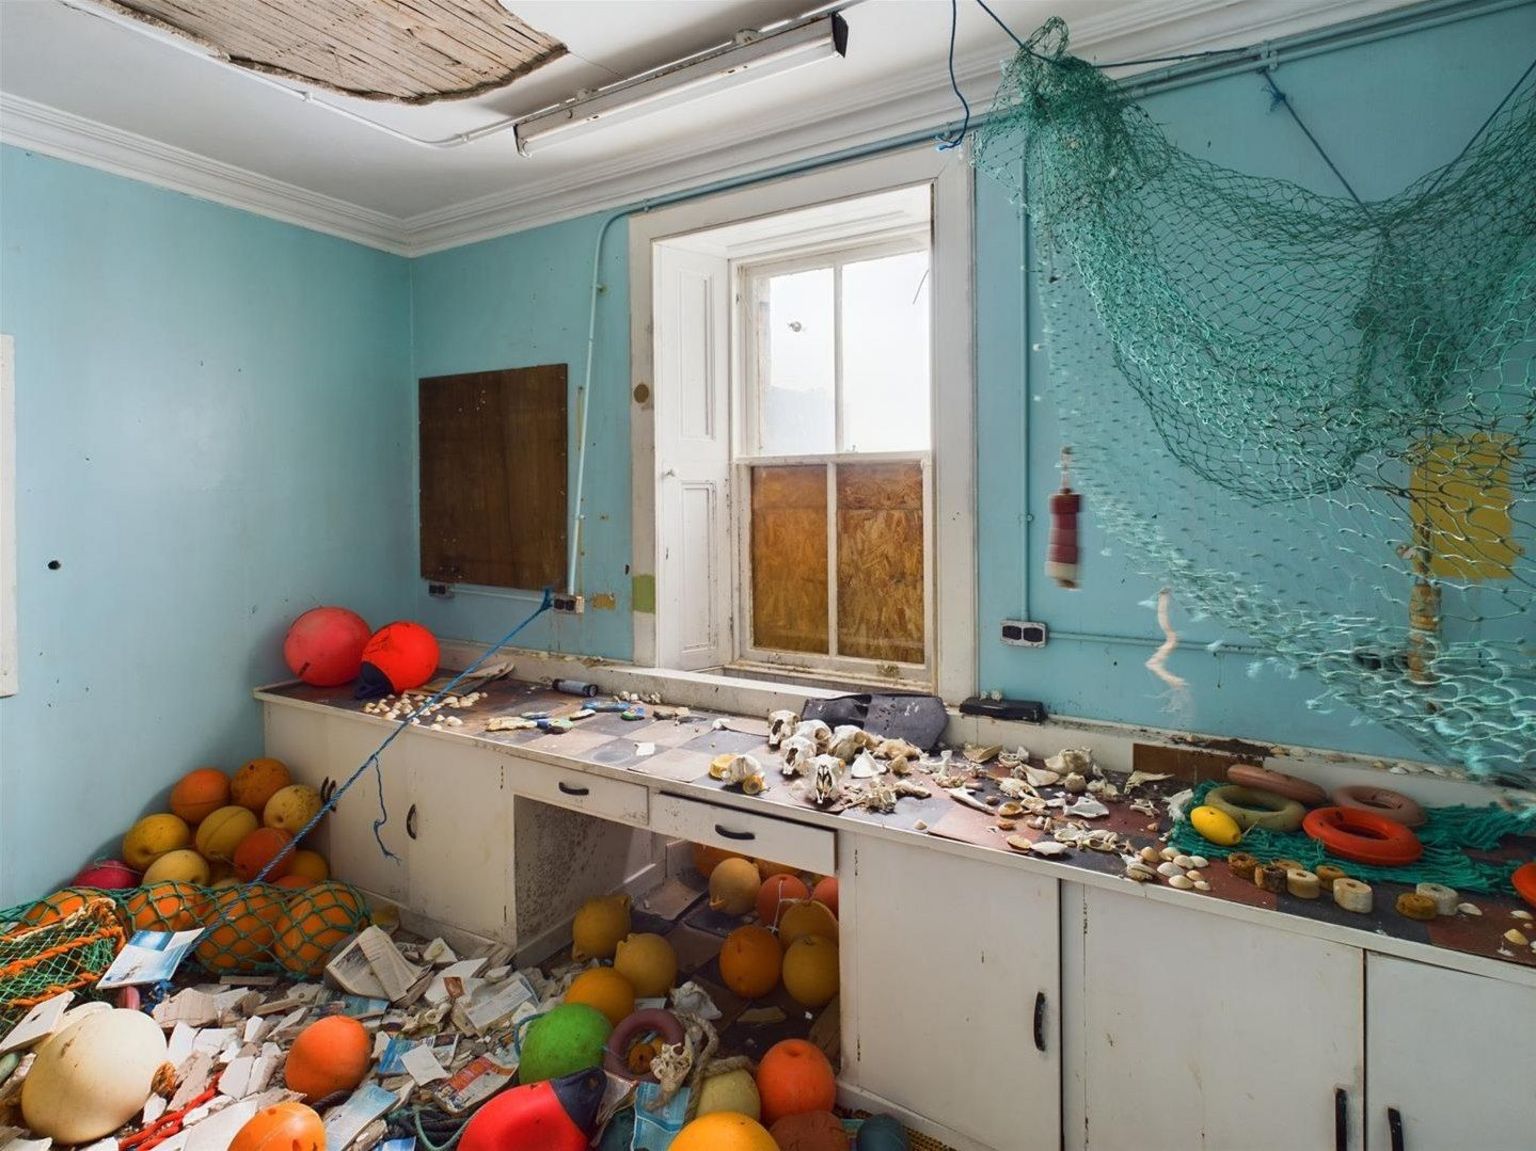 Interior of a bright blue painted kitchen with life buoys scattered on the floor and countertops and fishing net hanging on the wall